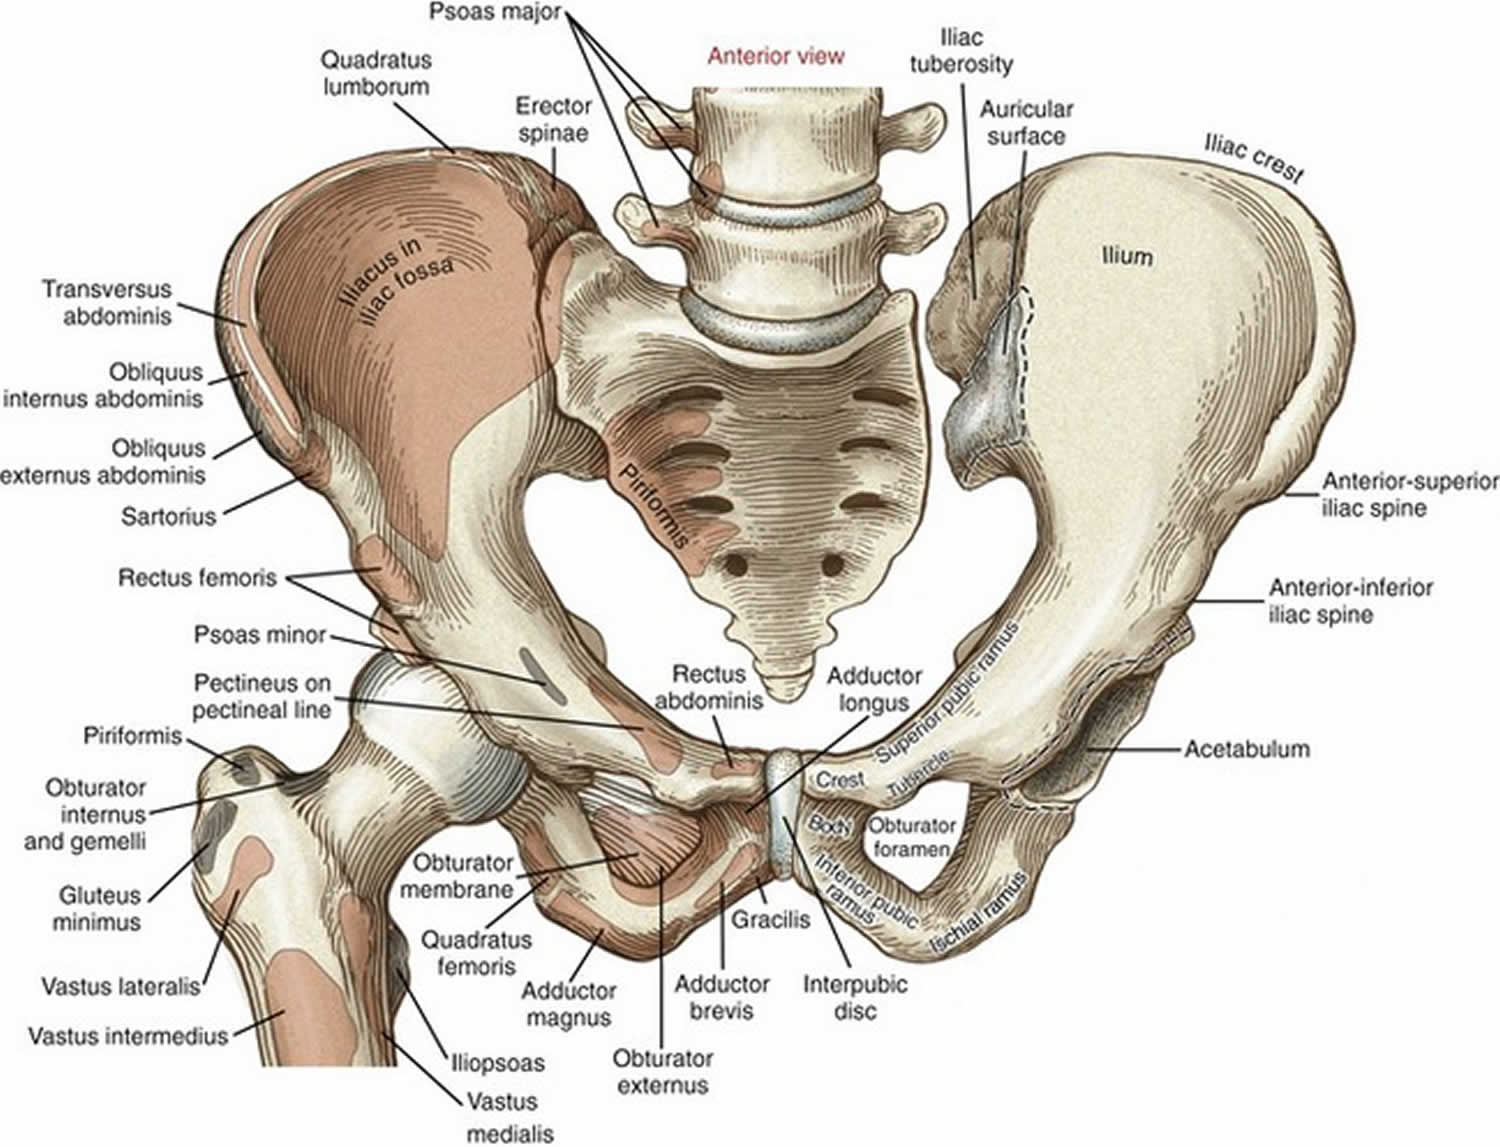 Hip pointer injury causes, symptoms, diagnosis, treatment & recovery time